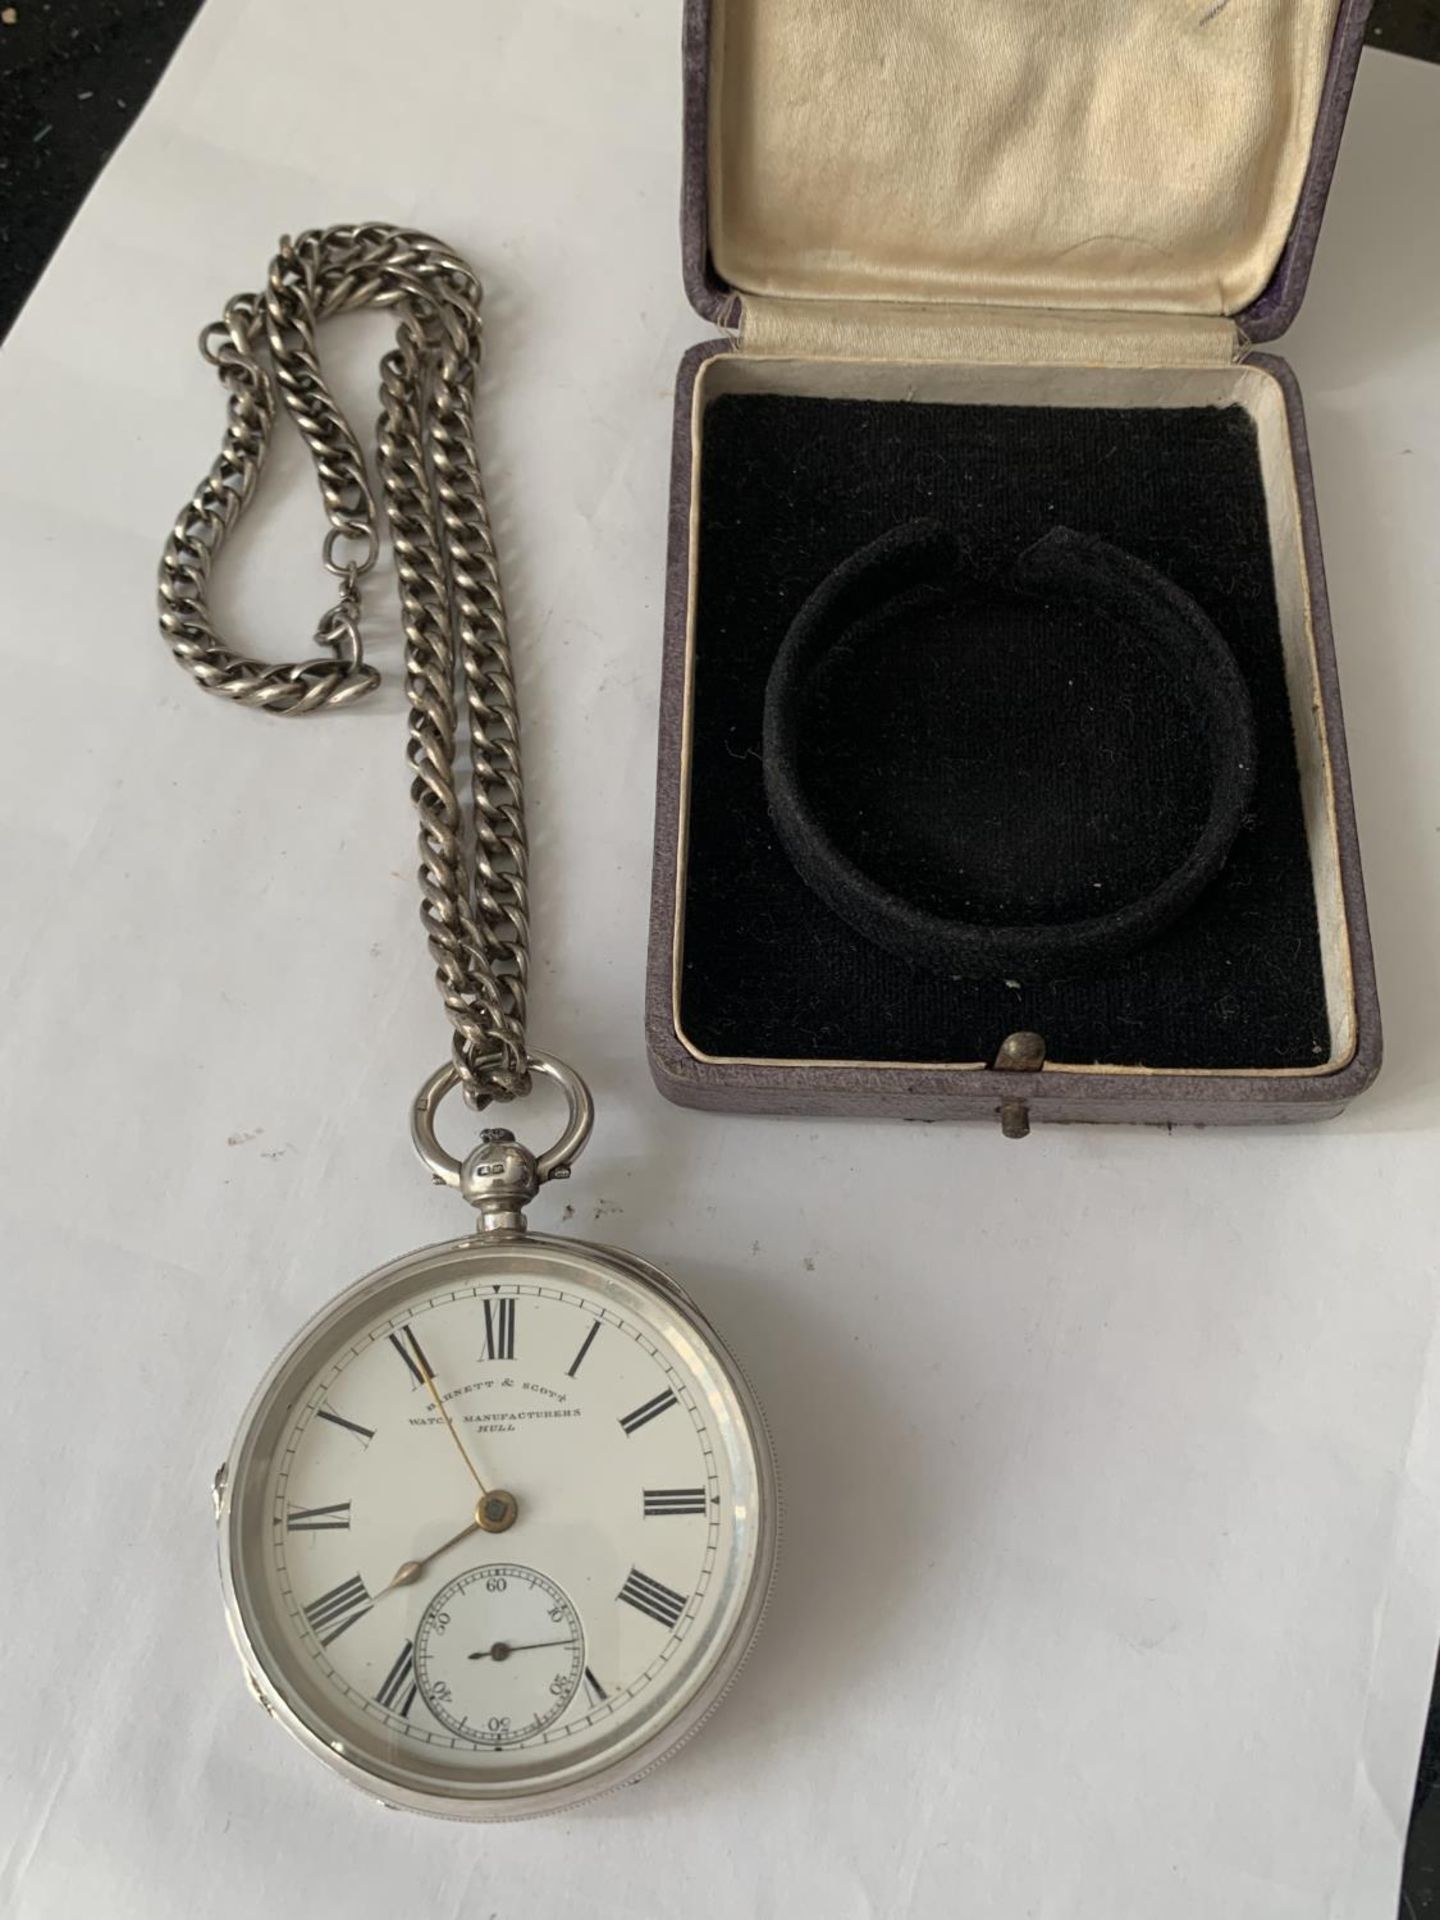 A HALLMARKED LONDON SILVER BARNET AND SCOTT HULLPOCKET WATCH WITH A HEAVY MARKED SILVER CHAIN IN A